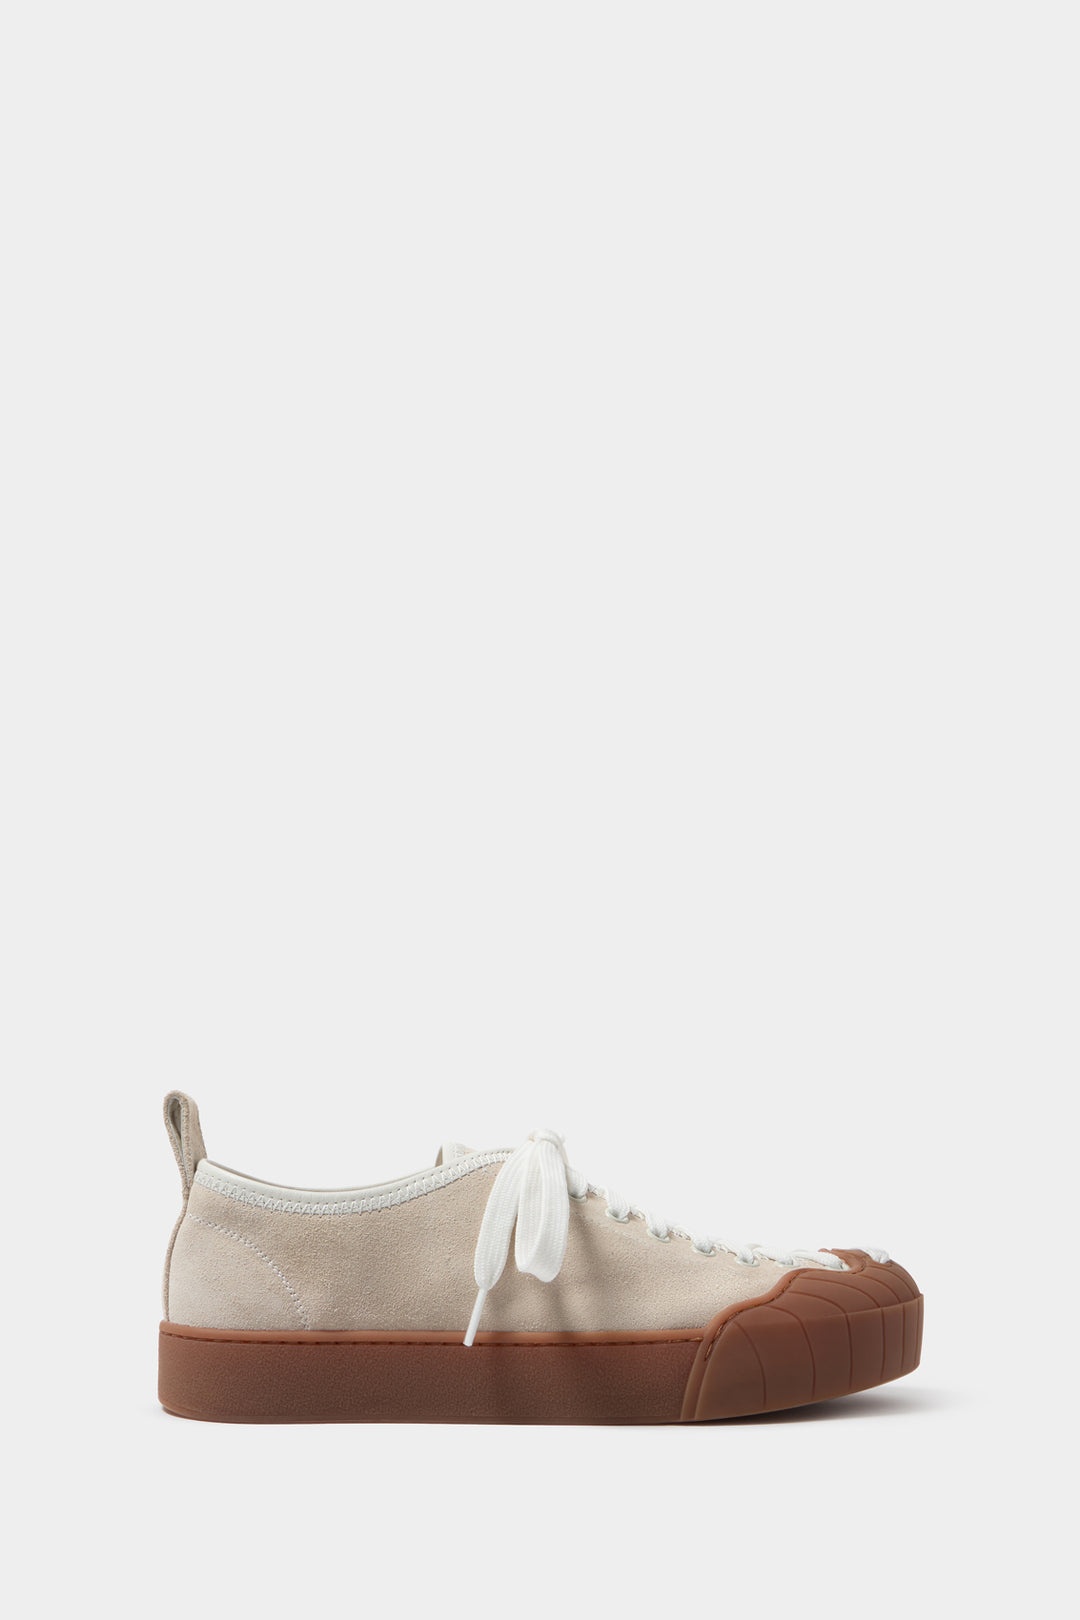 ISI LOW SHOES / off white - 1